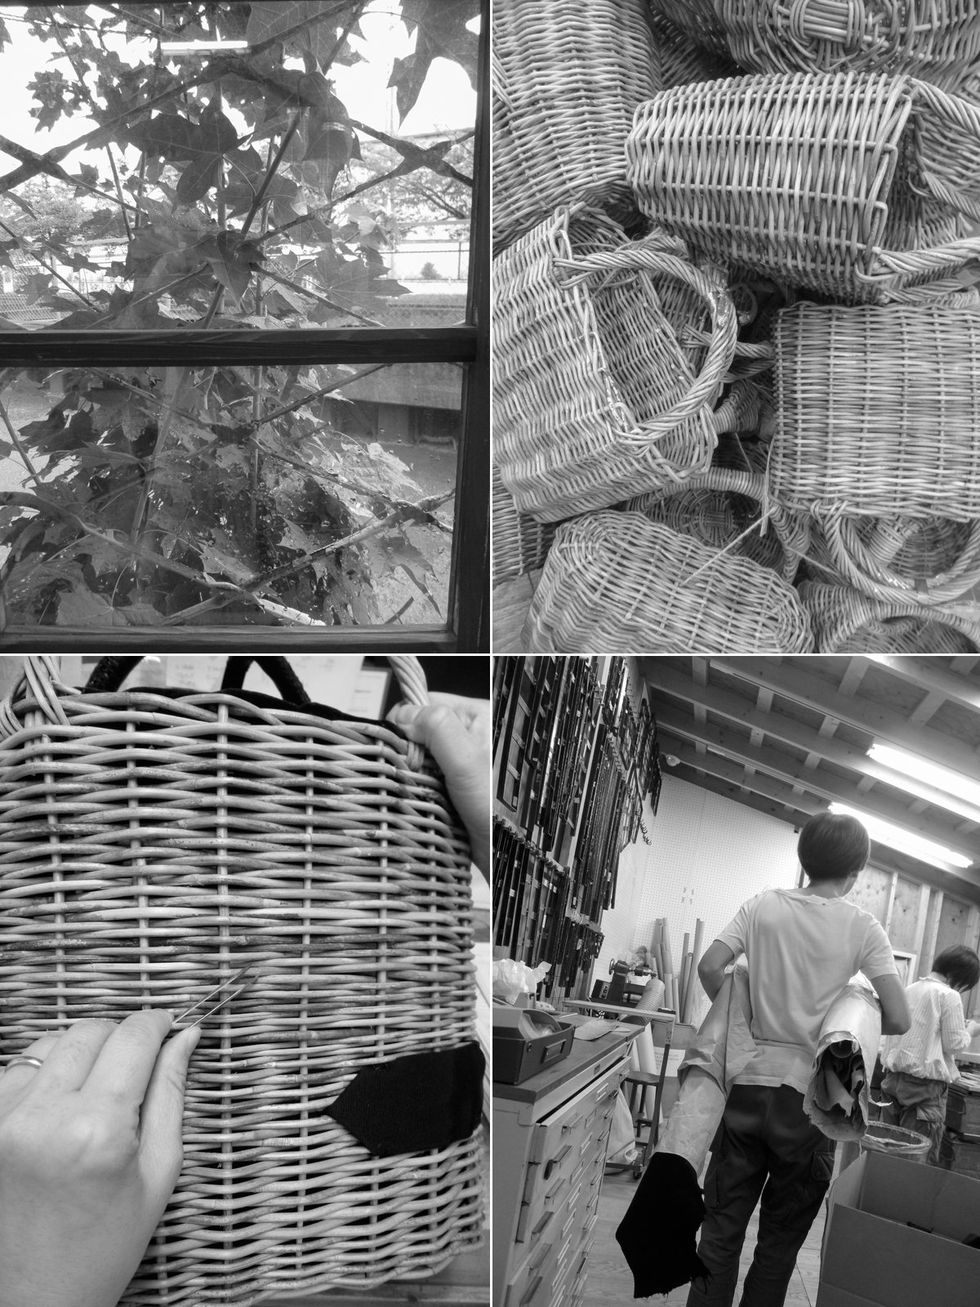 Monochrome, Monochrome photography, Basket, Black-and-white, Back, Wicker, Home accessories, Storage basket, Backpack, 